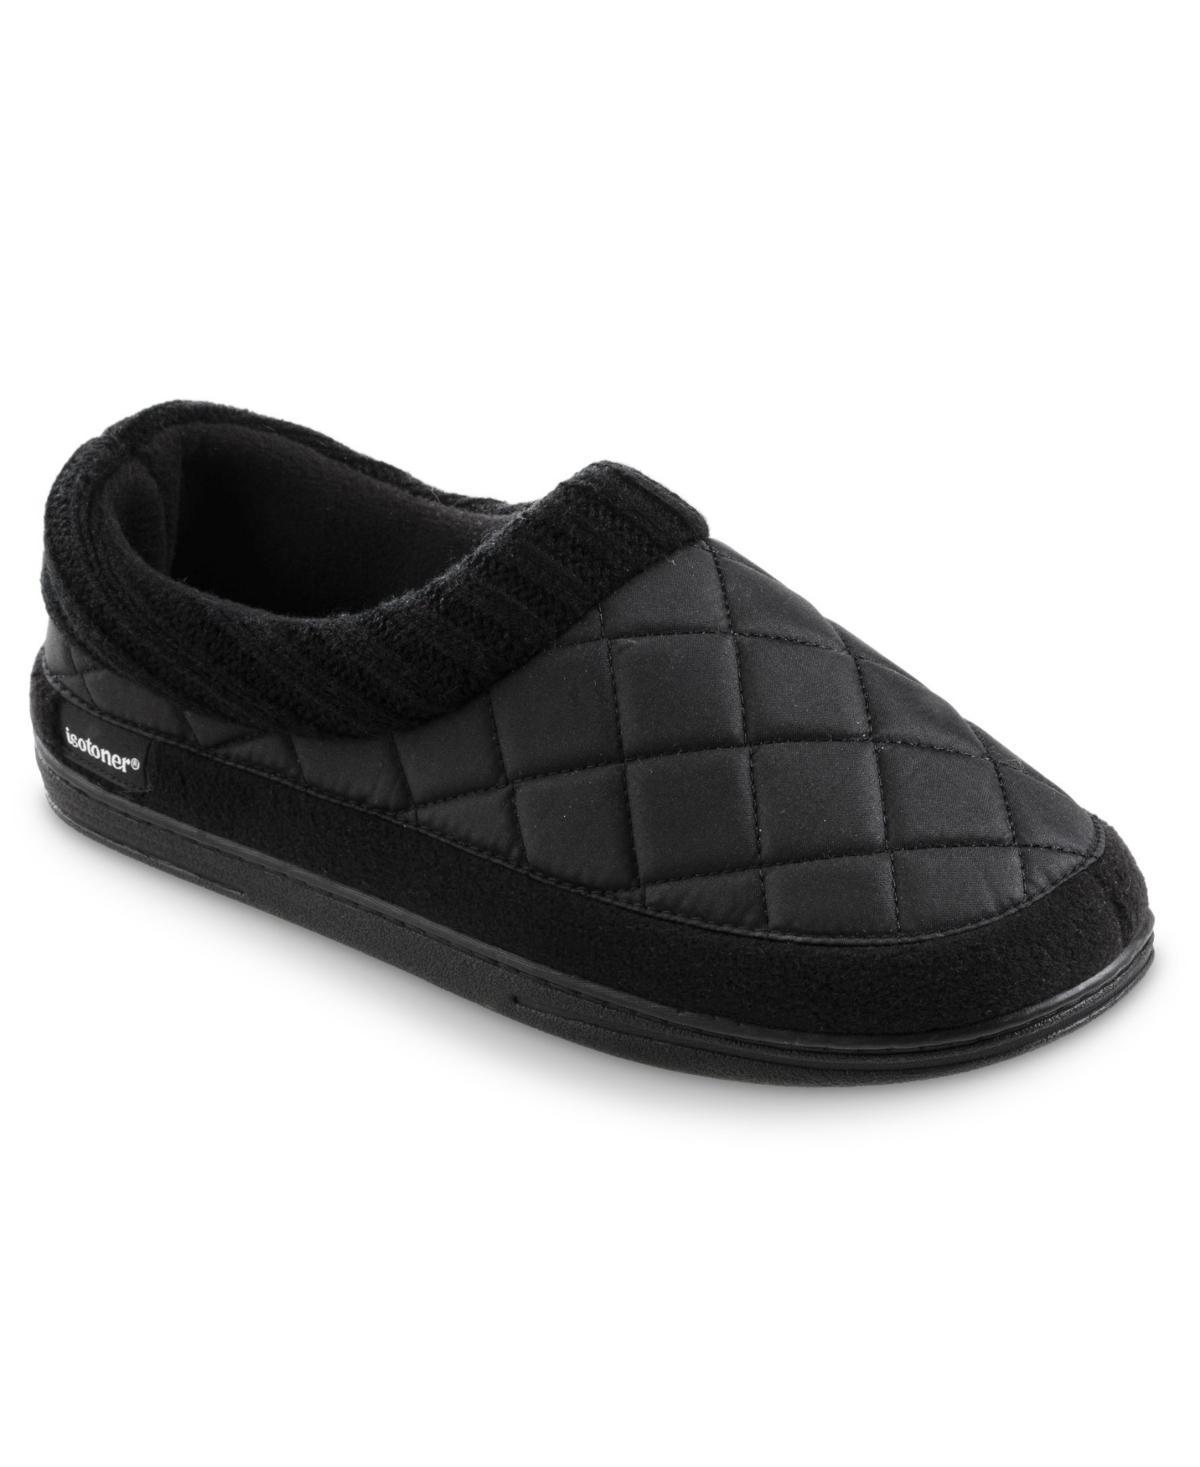 Isotoner Mens Bootie Slippers, X-large Product Image